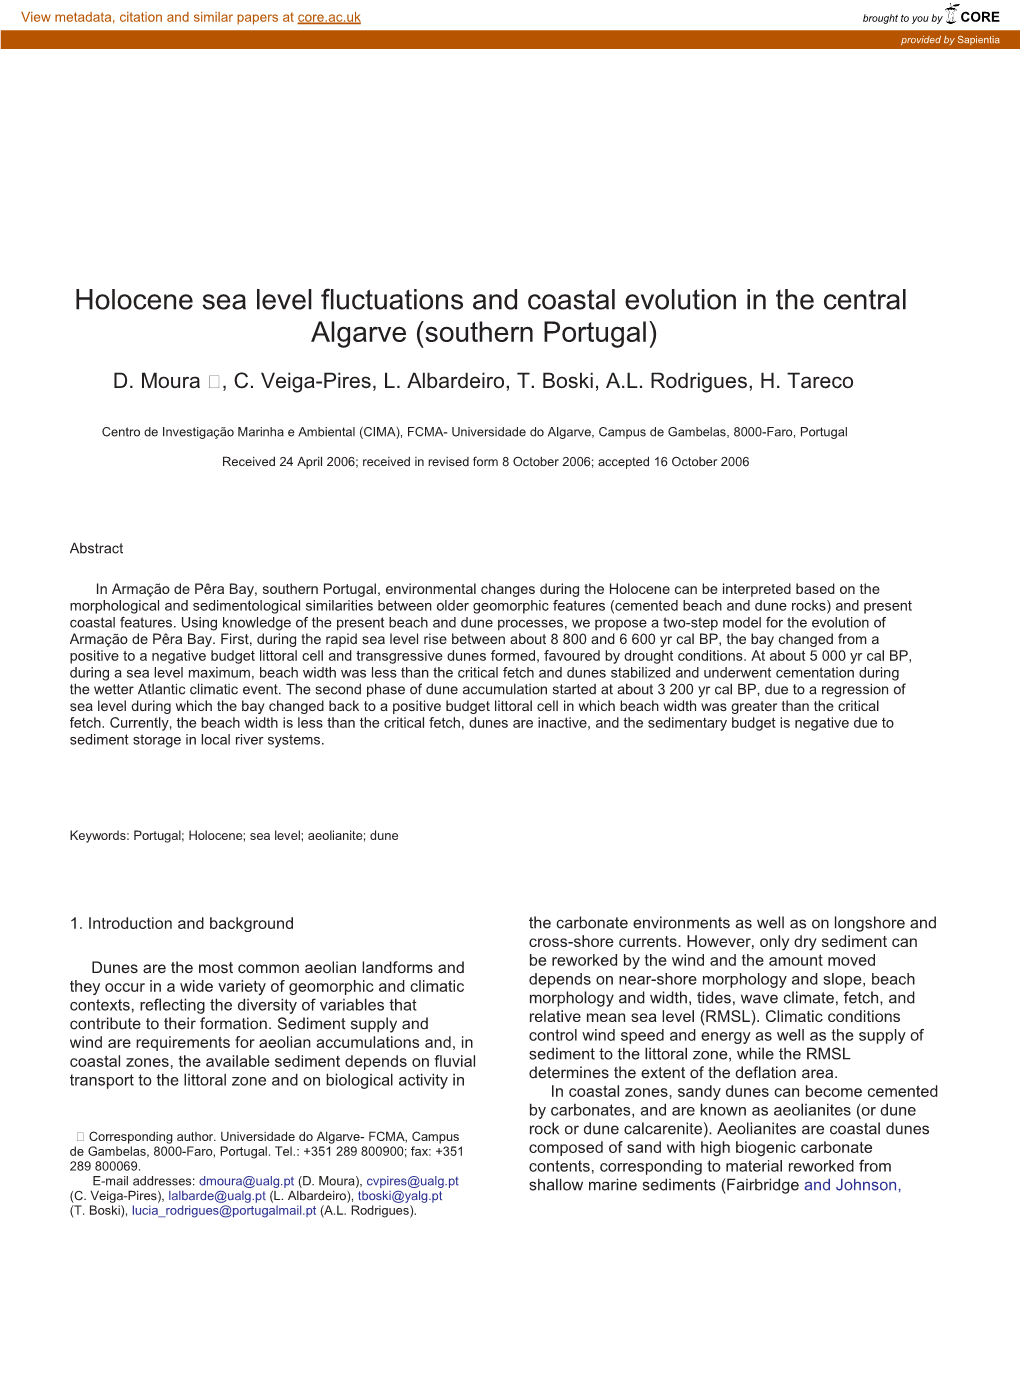 Holocene Sea Level Fluctuations and Coastal Evolution in the Central Algarve (Southern Portugal)